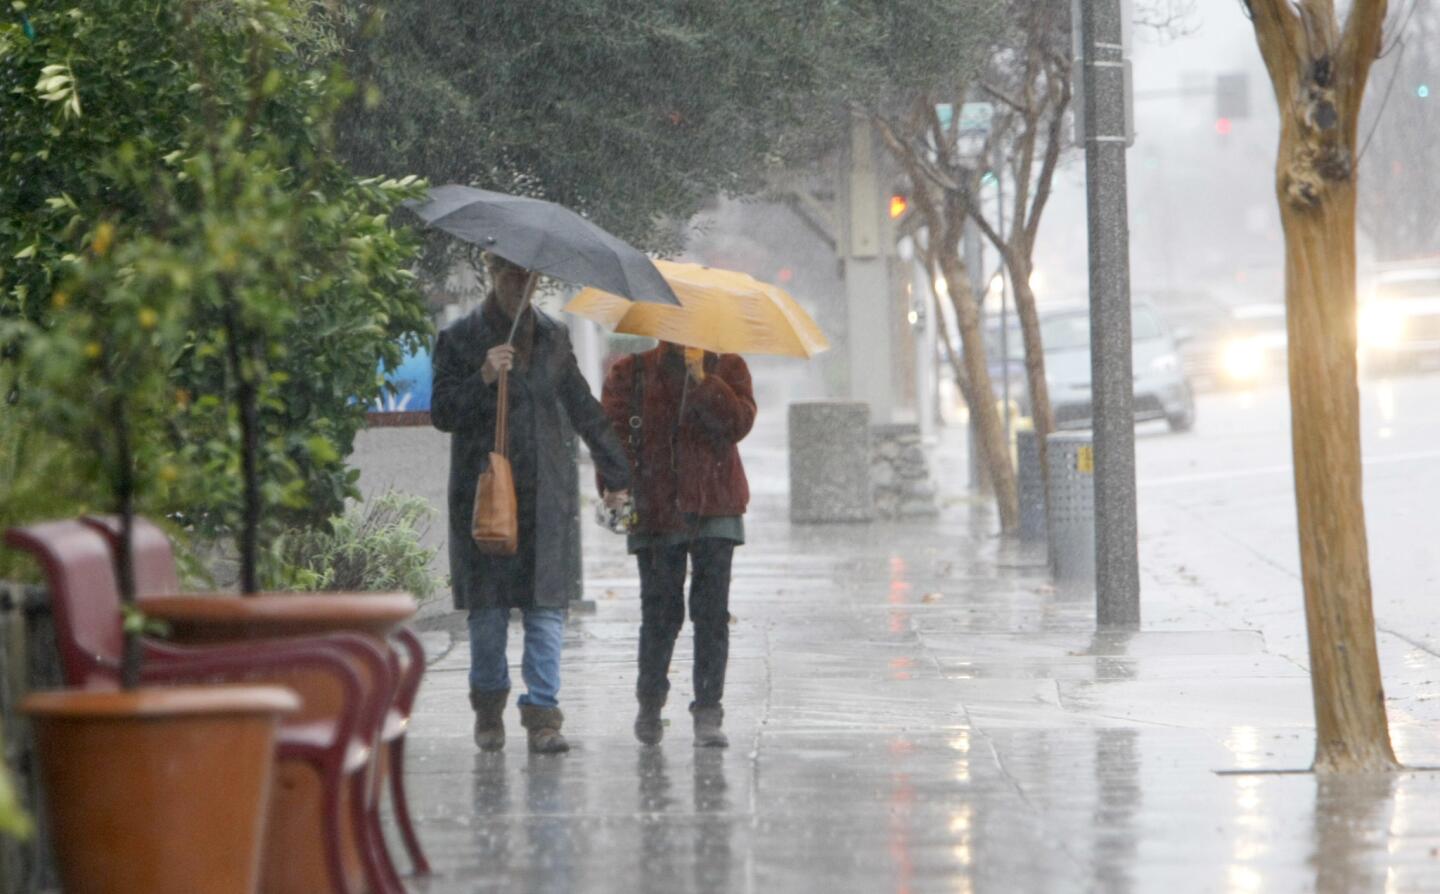 Two people head into Dish restaurant during a downpour on the 700 block of Foothill Blvd., in La Cañada Flintridge on Friday, Jan. 20, 2017. Rain was expected to continue through the weekend.